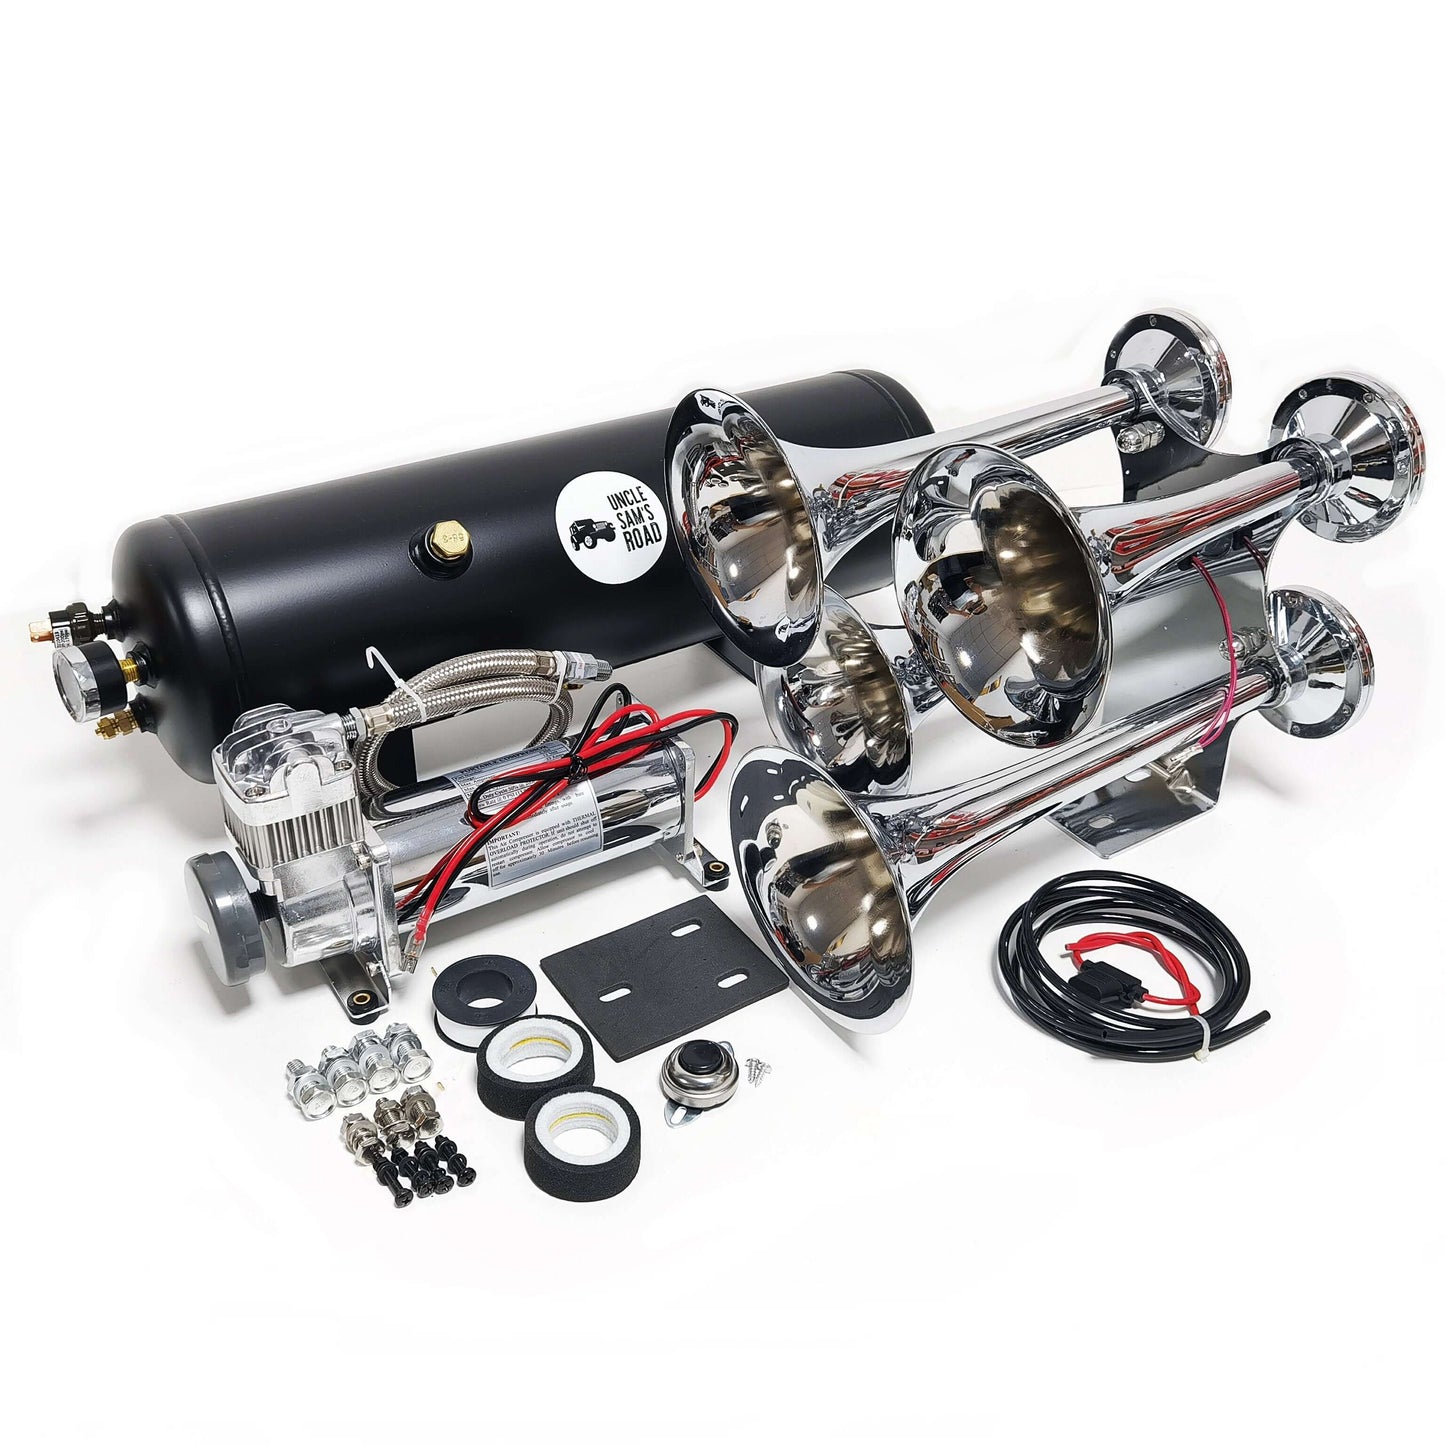 [UNIQUE OFFER] Cyclone 3Gal Train Horn Kit Uncle Sam's Road 